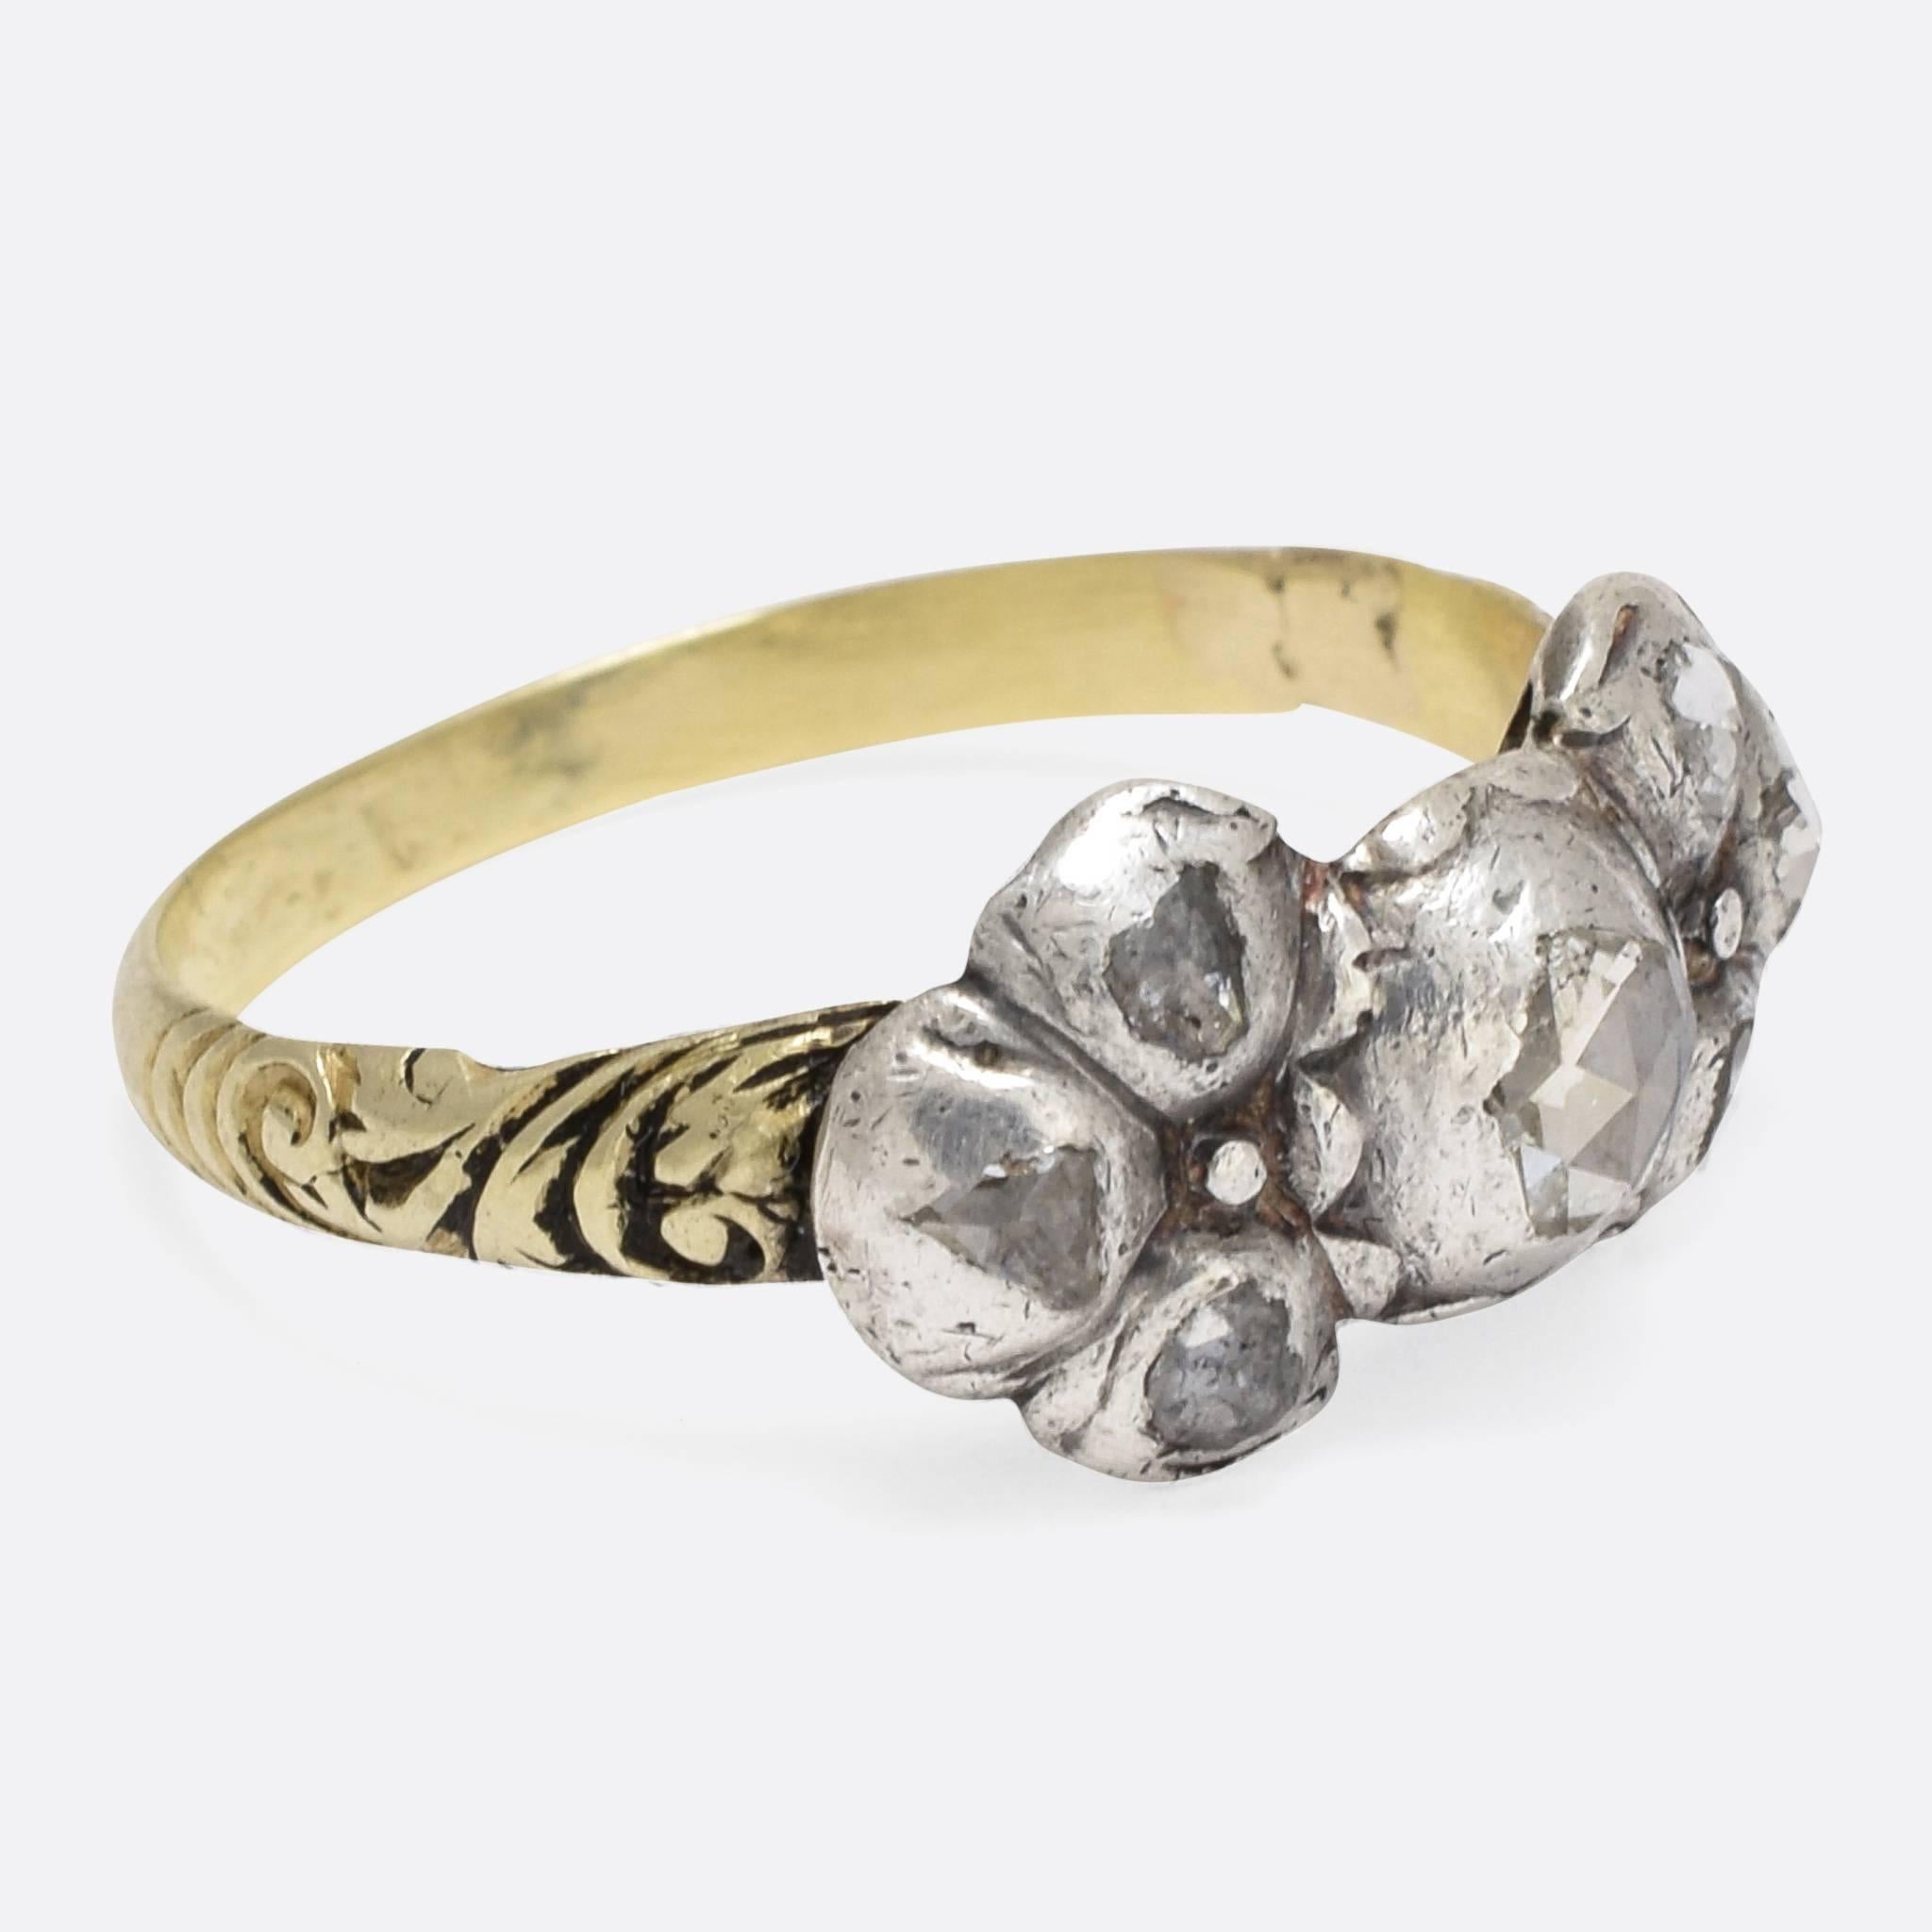 A stunning 17th Century (!!) Portuguese diamond bow ring, one of the nicest I've seen. It's a great size, more dainty than most, with excellent detailing to the head and a black enamelled band with scrolled and foliate decoration. The back of the